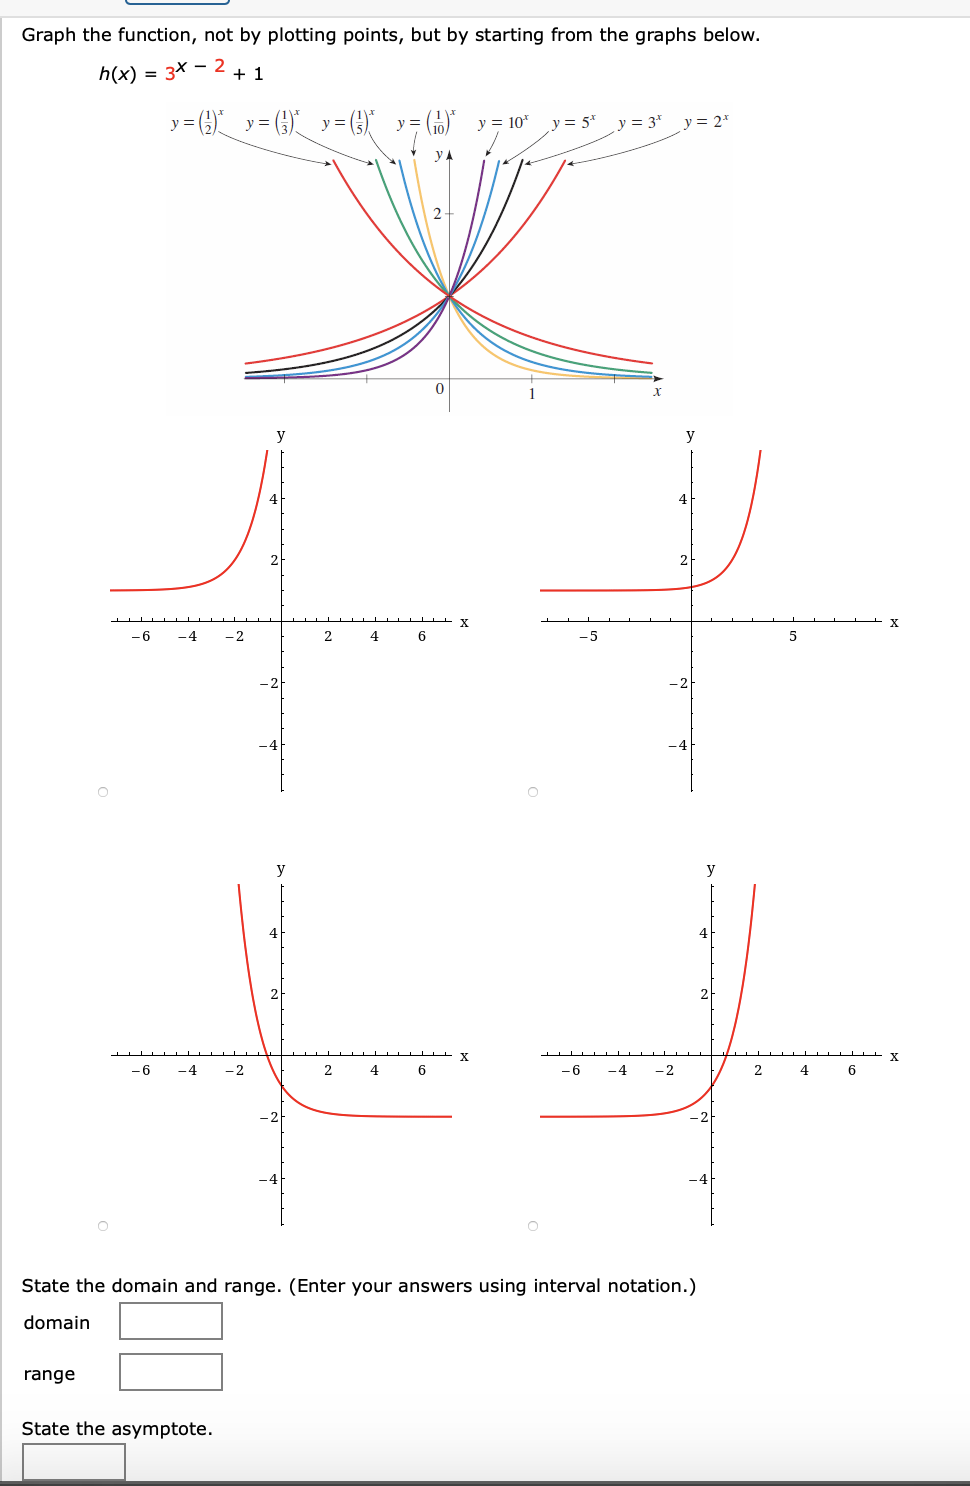 Graph the function, not by plotting points, but by starting from the graphs below.
h(x) = 3x – 2
+ 1
y= () y= (6) y=)
GO y = 10*
y =
y = 5*
y = 3*
y = 2*
y
y
4
4
2
2
X
X
-6
-4
-2
2
-5
y
y
-6
-4
-2
2
6
-6
-4
-2
4
State the domain and range. (Enter your an
sing interval notation.)
domain
range
State the asymptote.
